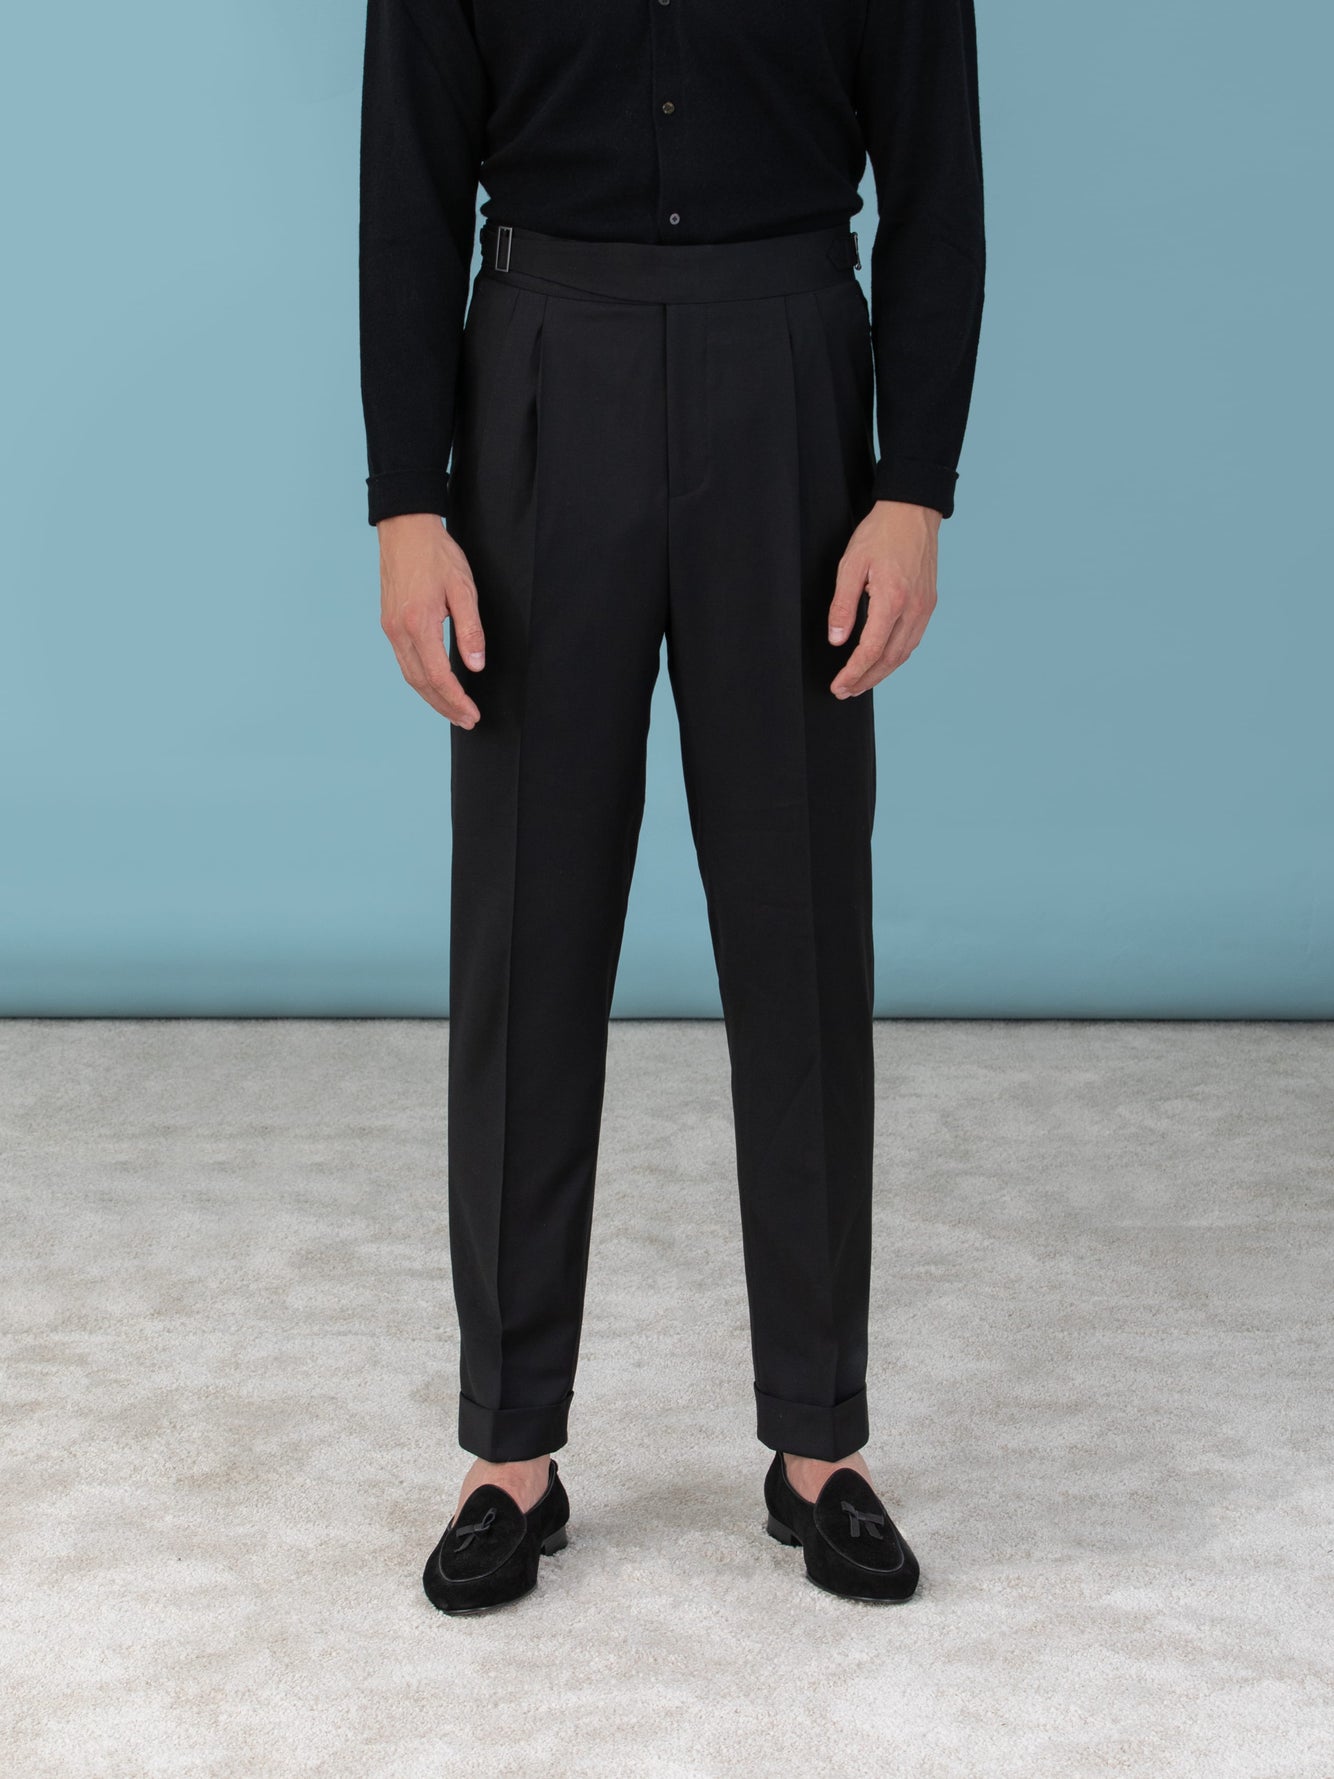 Men's Classic Trousers - Clasic Flat Front & Pleated Trousers | SUITSUPPLY  India